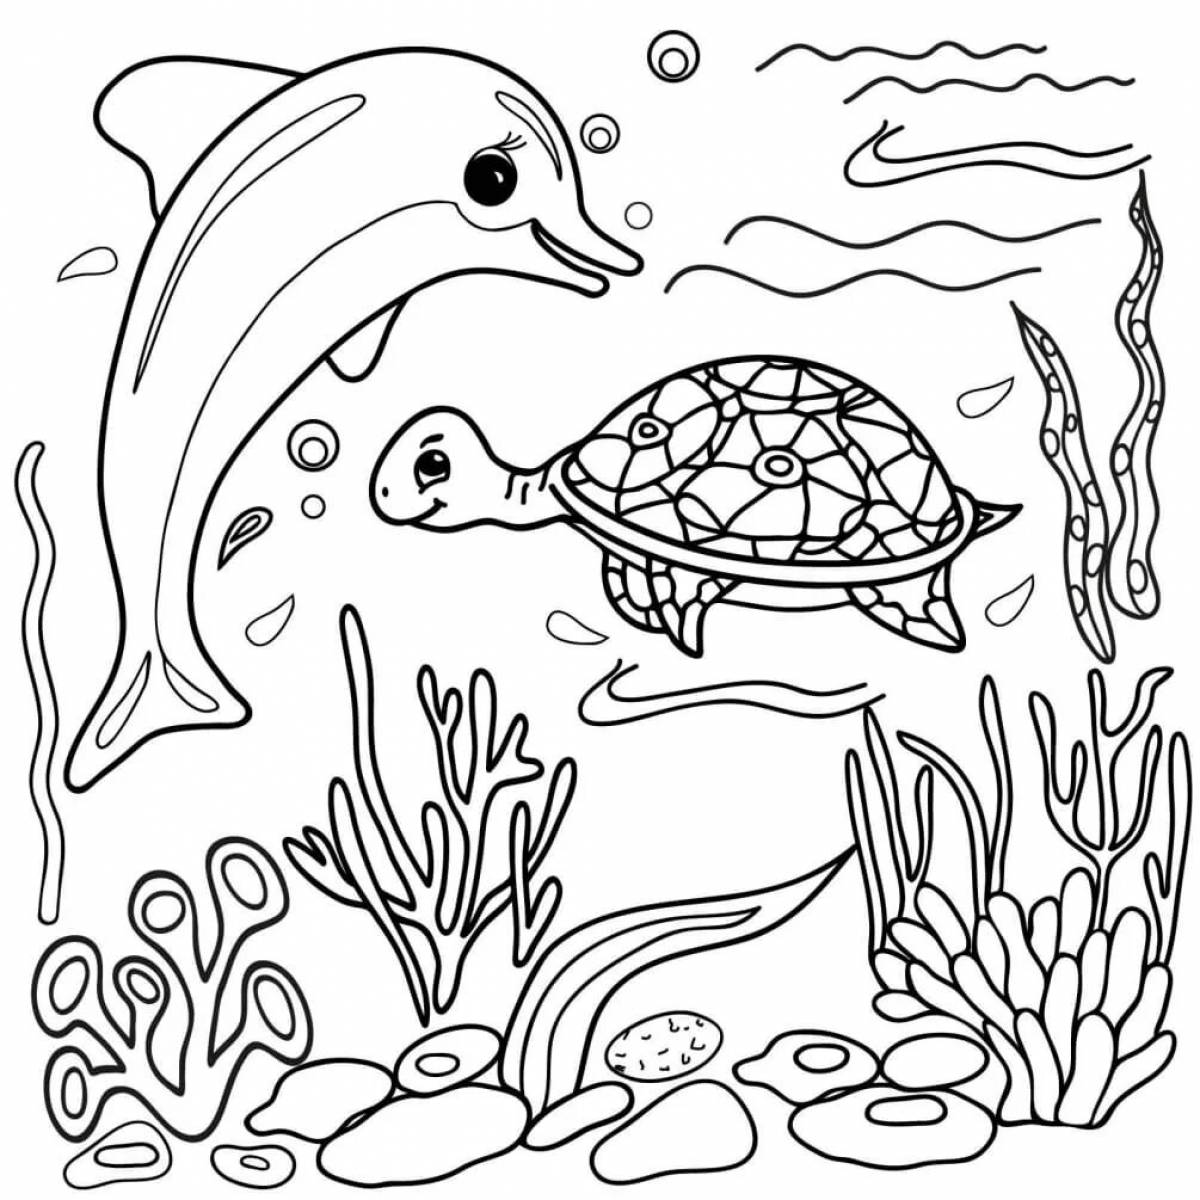 A wonderful dolphin coloring book